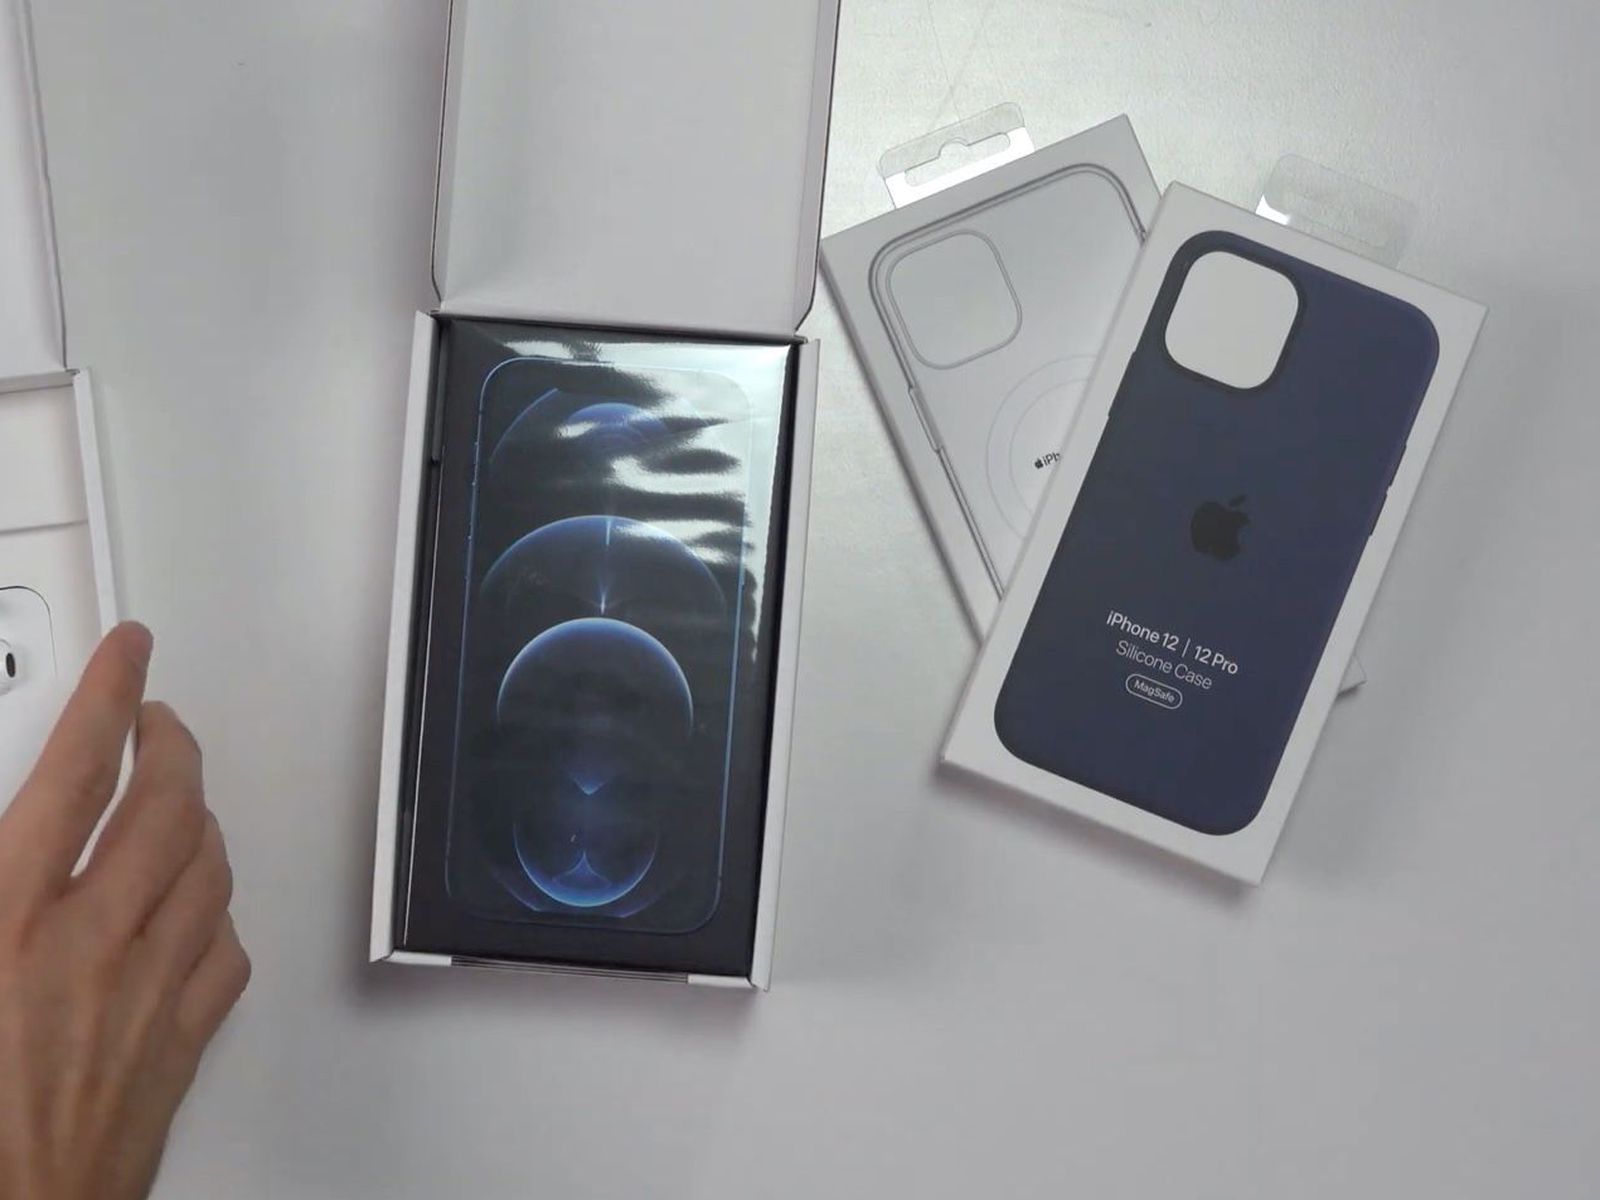 French Iphone Boxes Come Packed In An Outer Box With Separate Earpods Macrumors